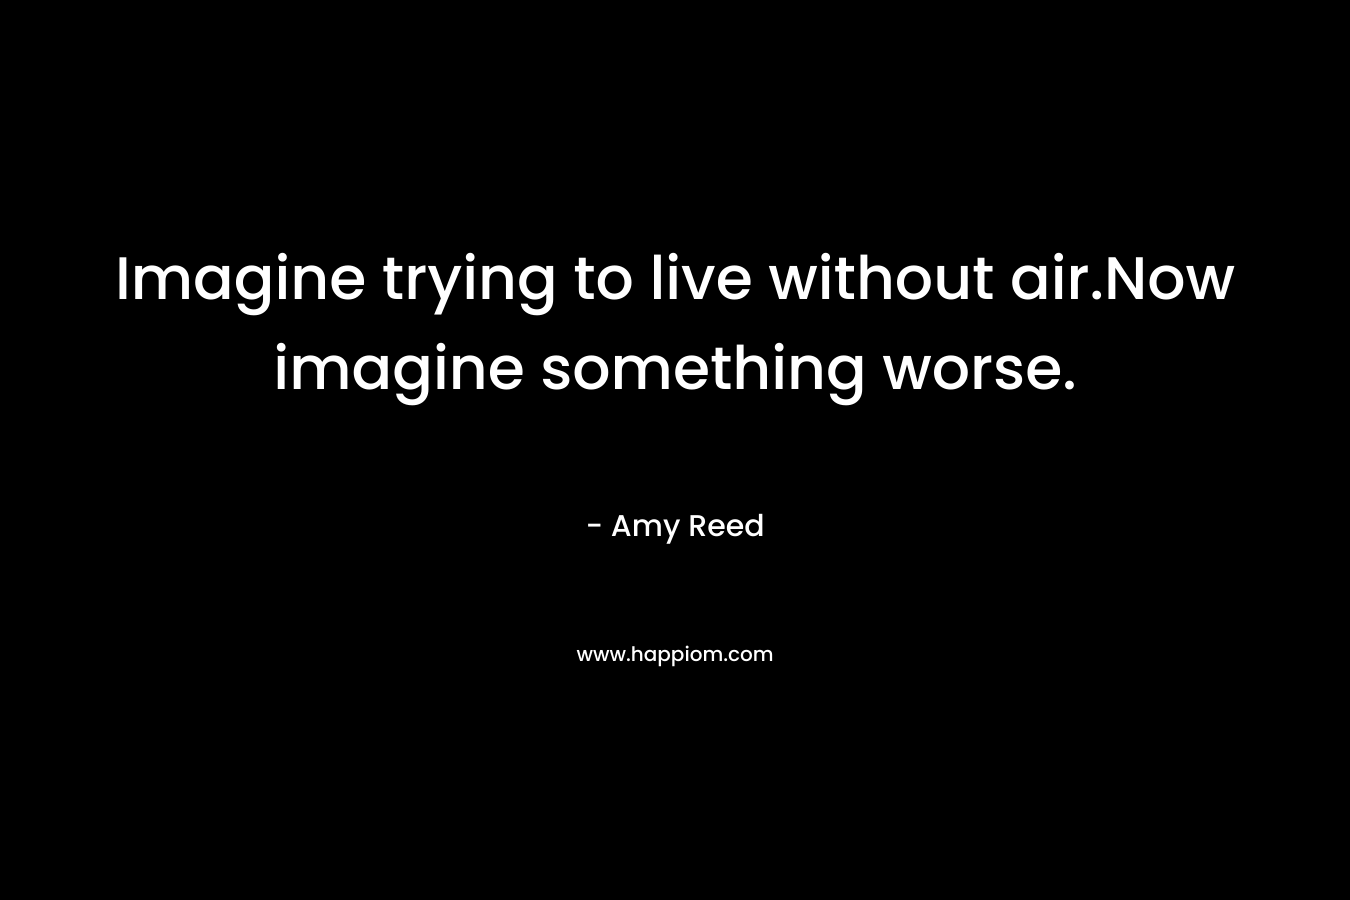 Imagine trying to live without air.Now imagine something worse. – Amy Reed